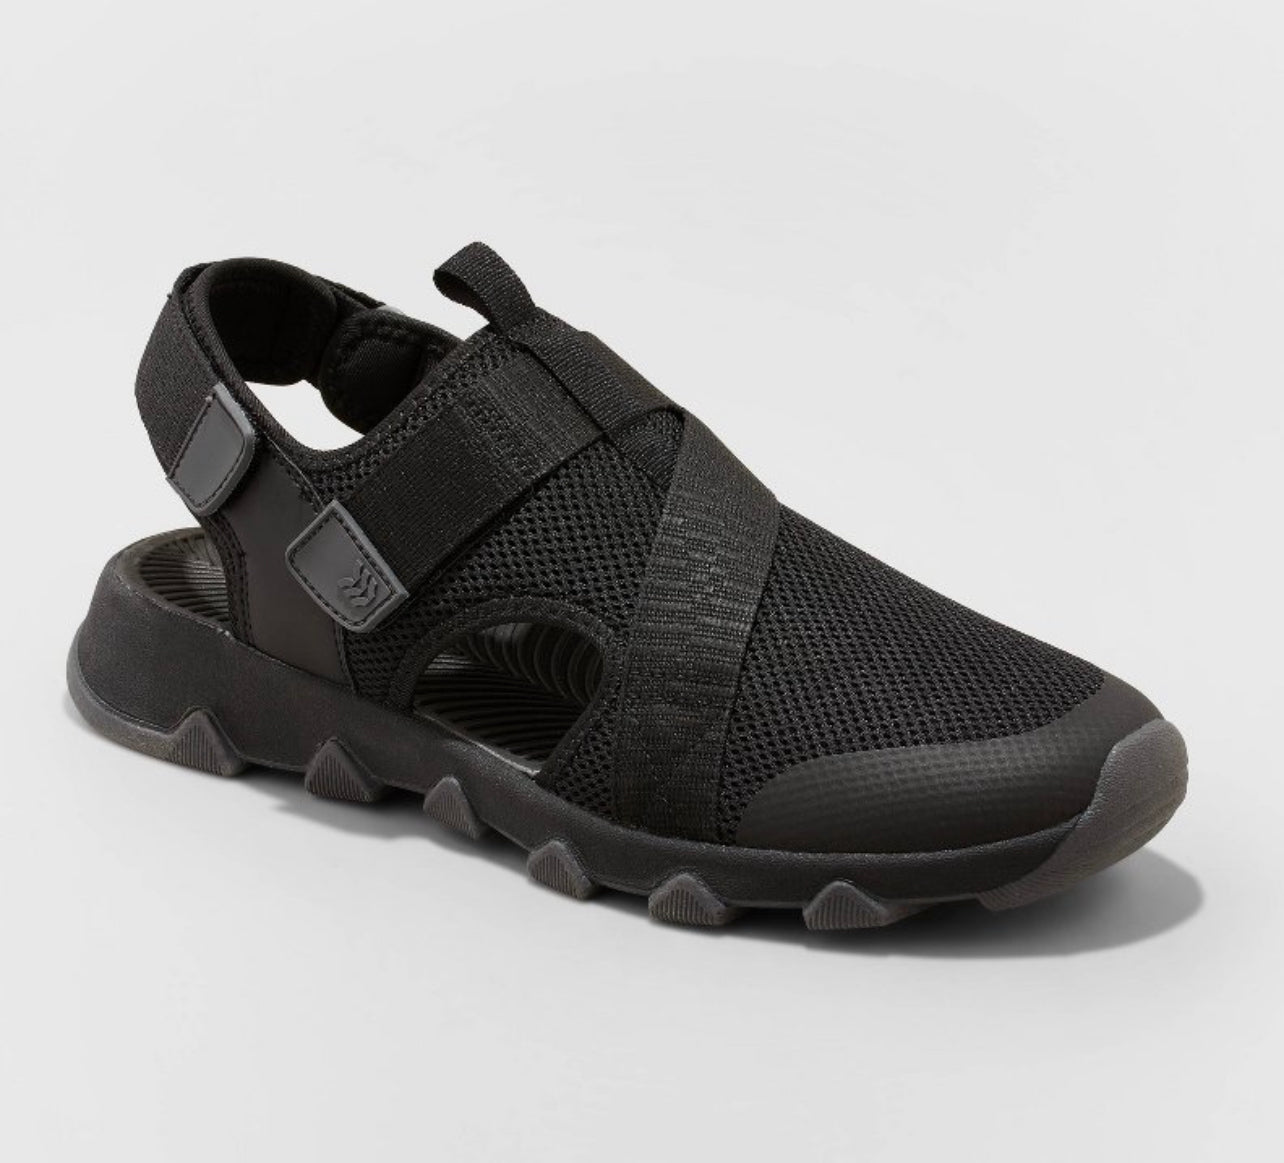 Men's All in Motion Max water shoes for $13 - Clark Deals